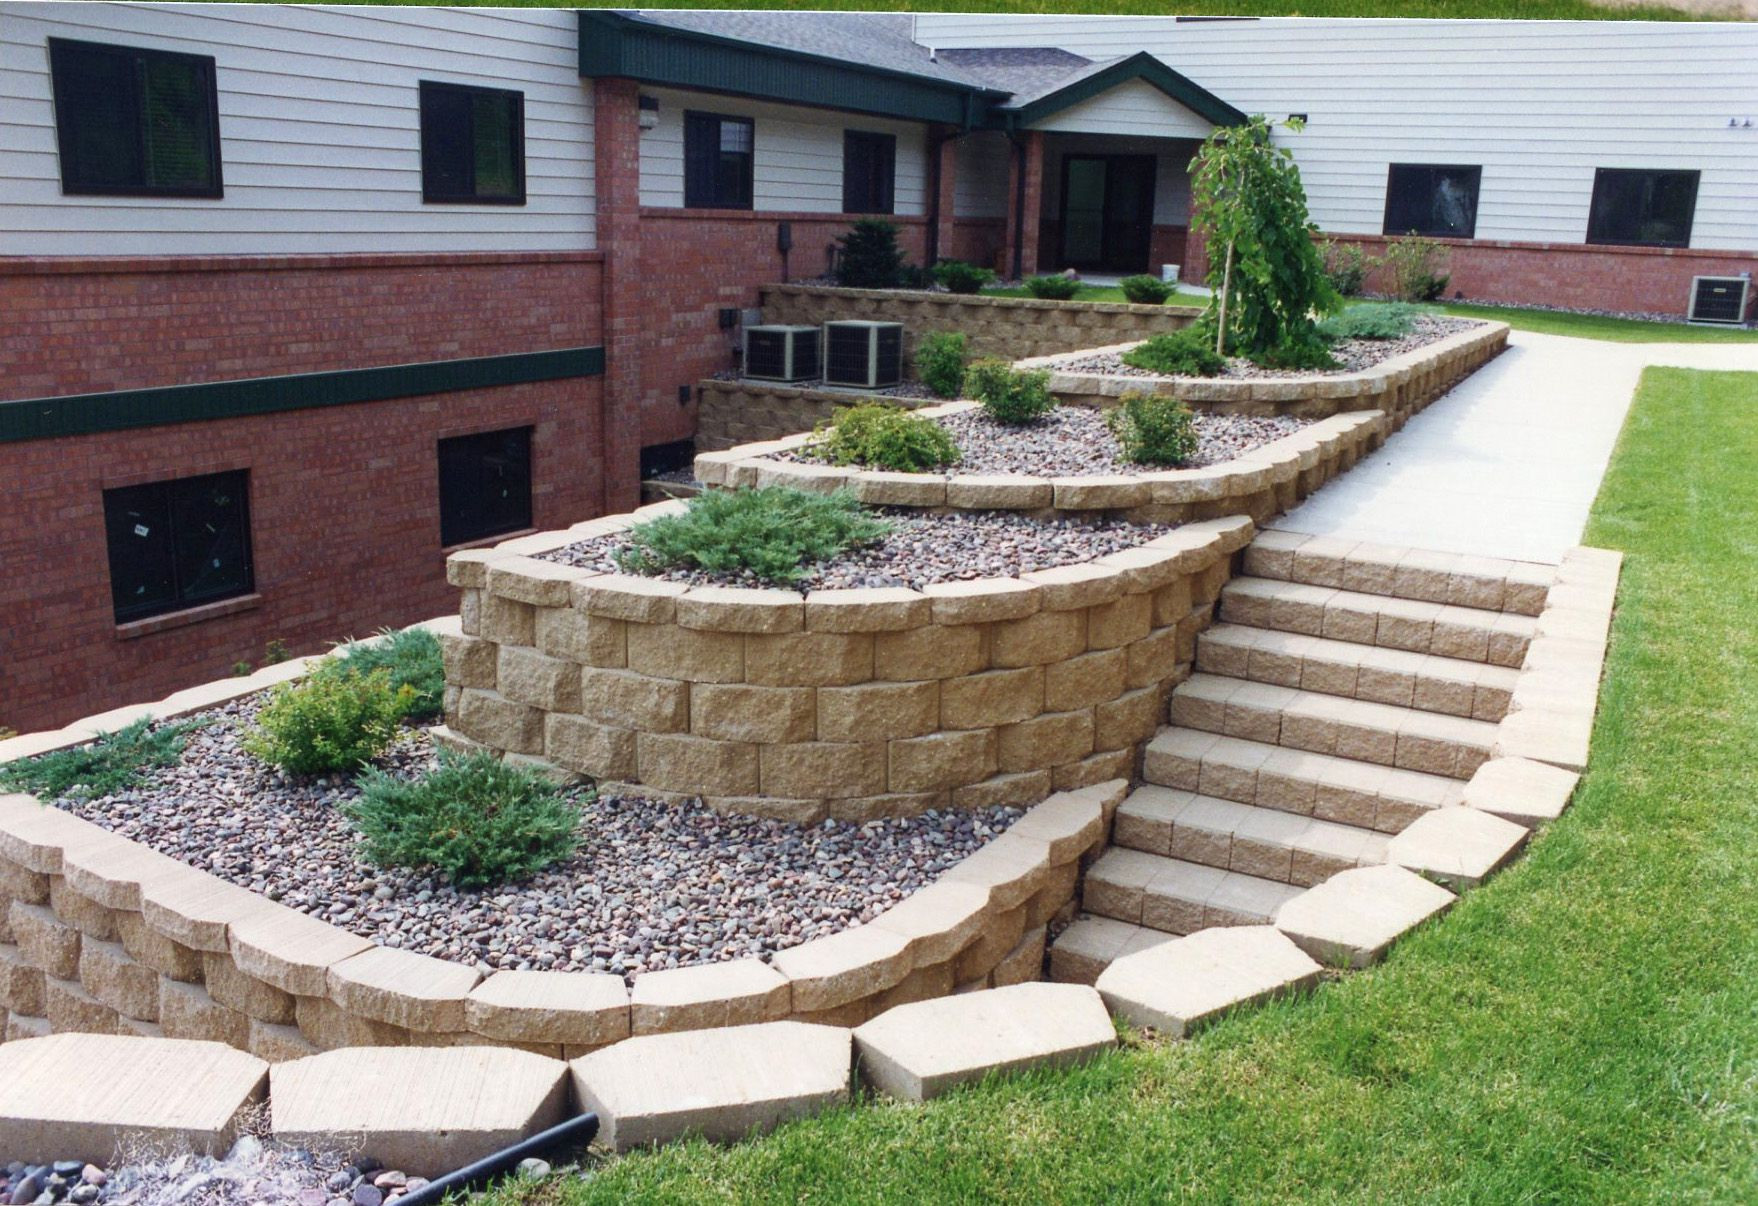 Outdoor Landscape Wall
 Retaining Wall Design pleting Nature Exterior Nuance